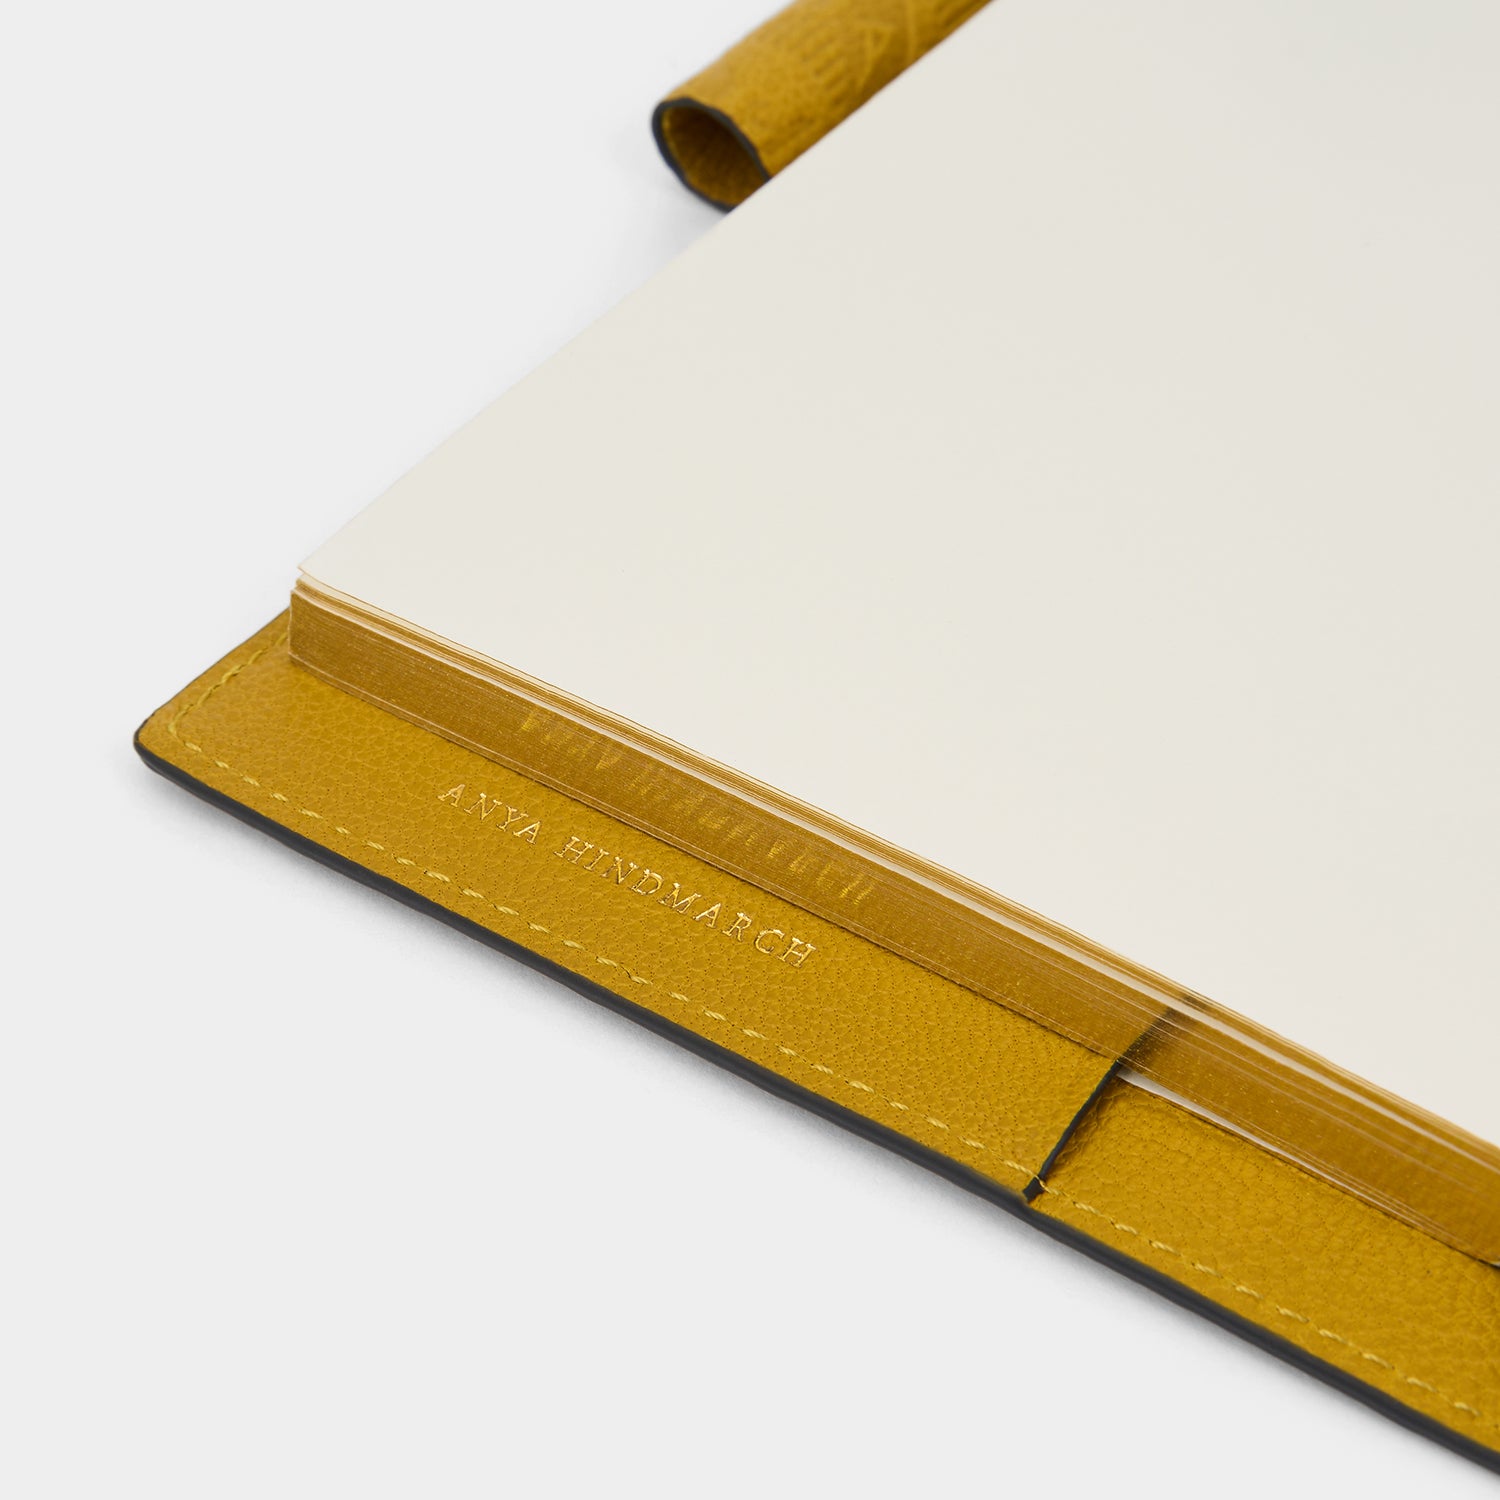 Anya Brands Coco Pops A6 Journal -

                  
                    Capra Leather in Mustard -
                  

                  Anya Hindmarch UK
